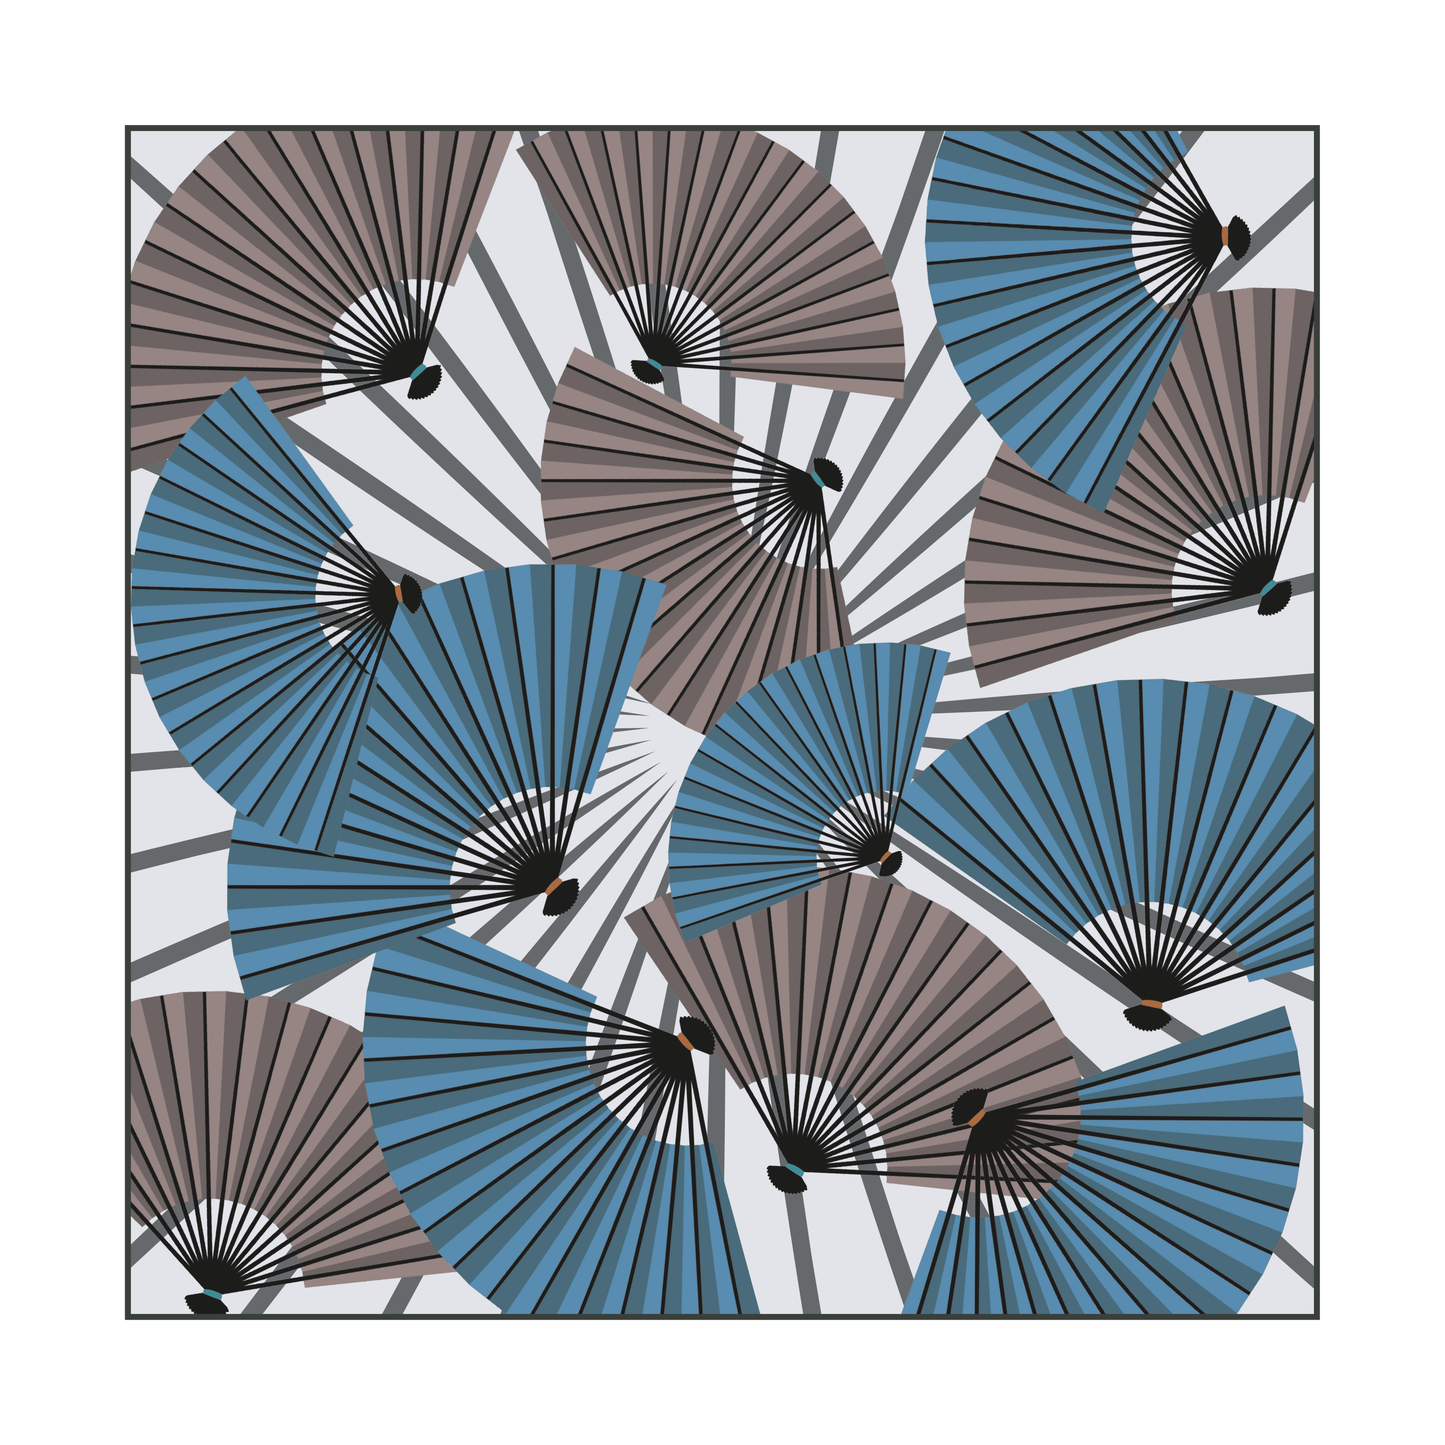 Japanese Inspired Square Print Designs:  Fans